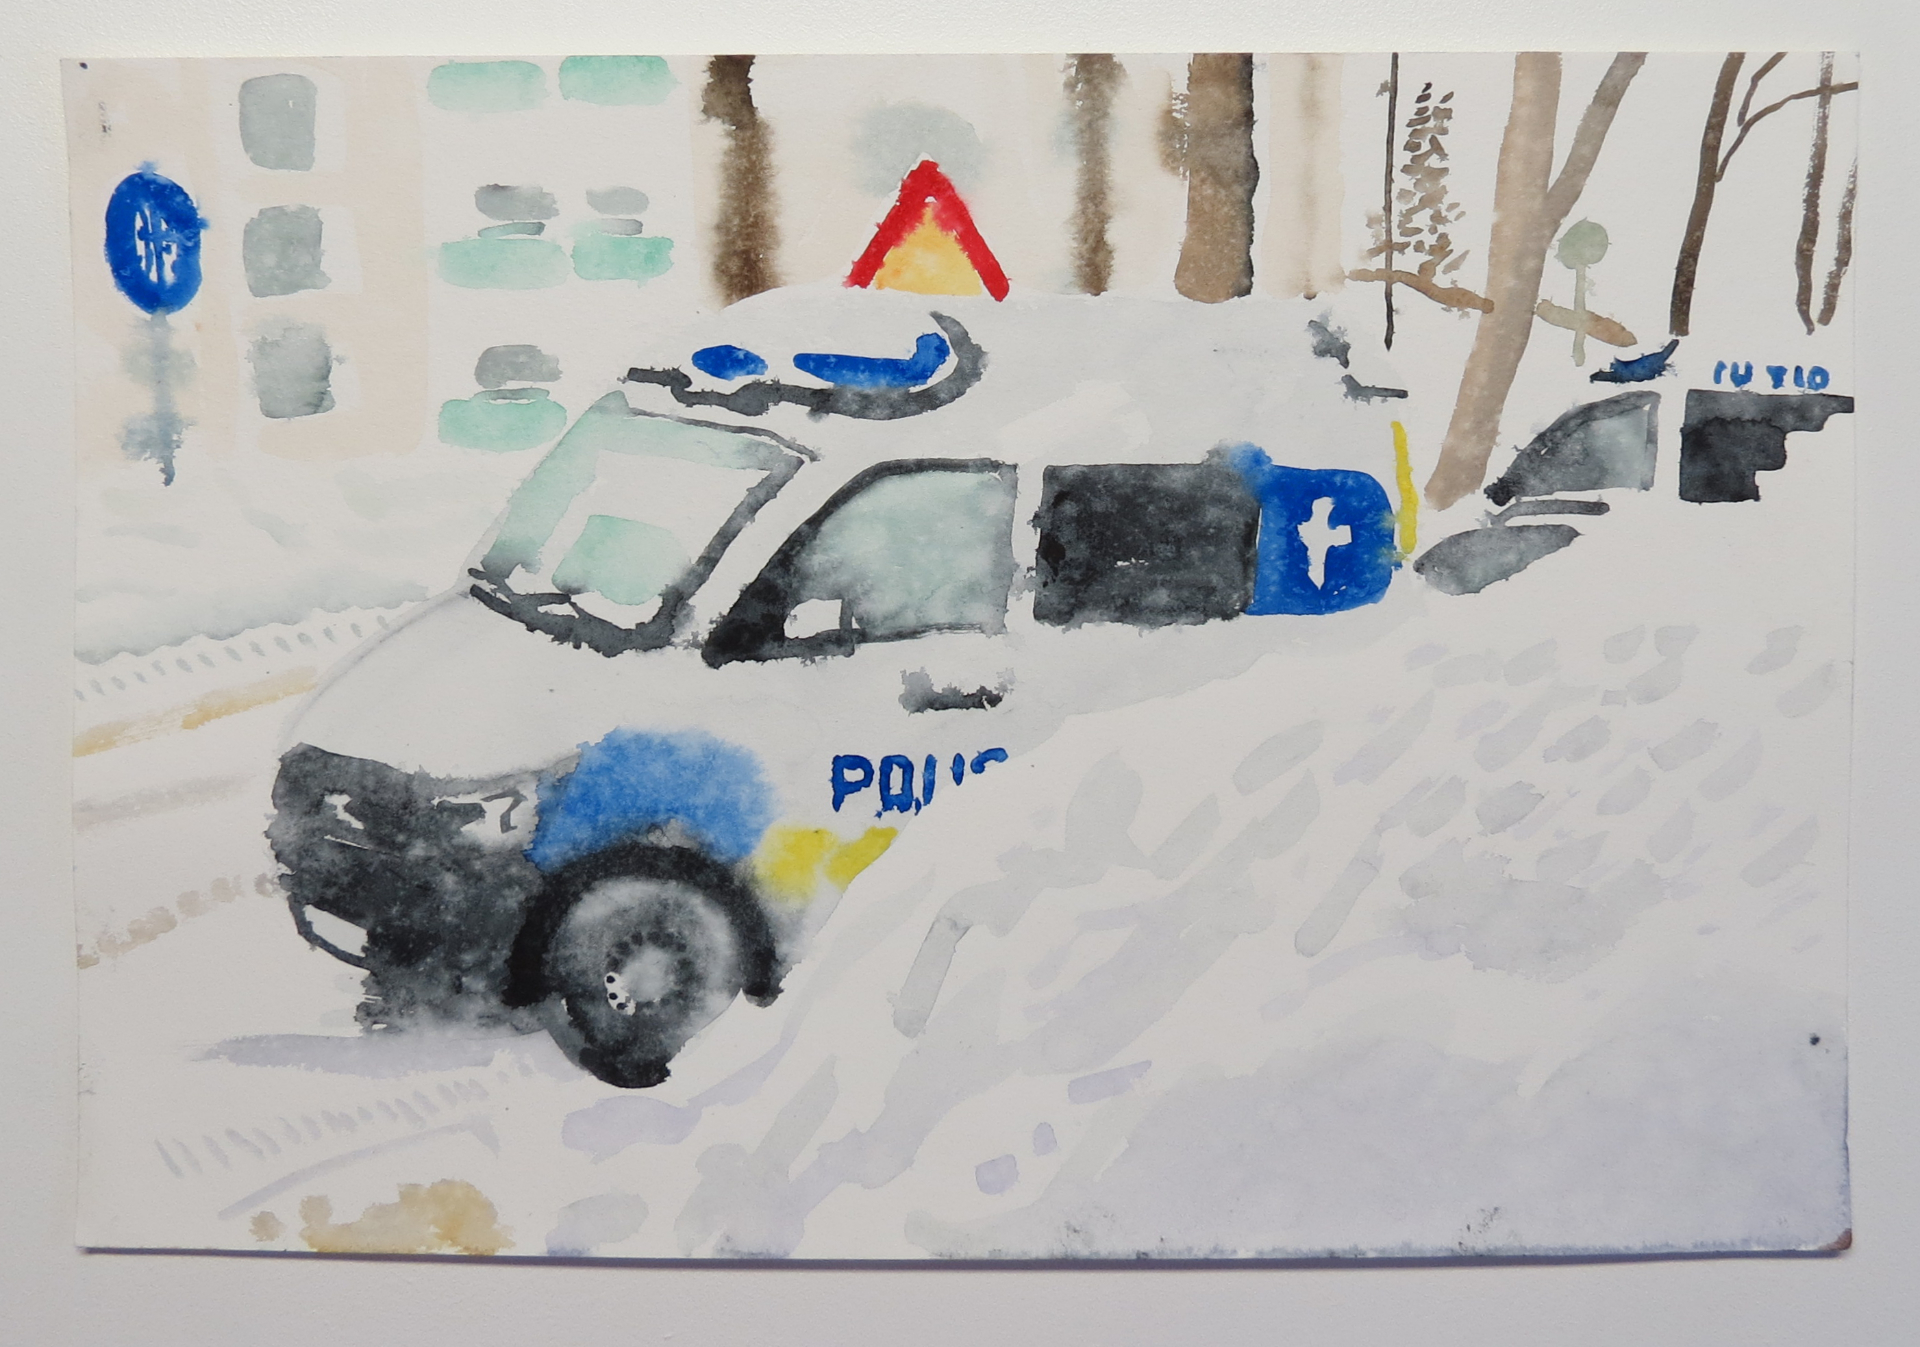 16 Snow mountain by the police station